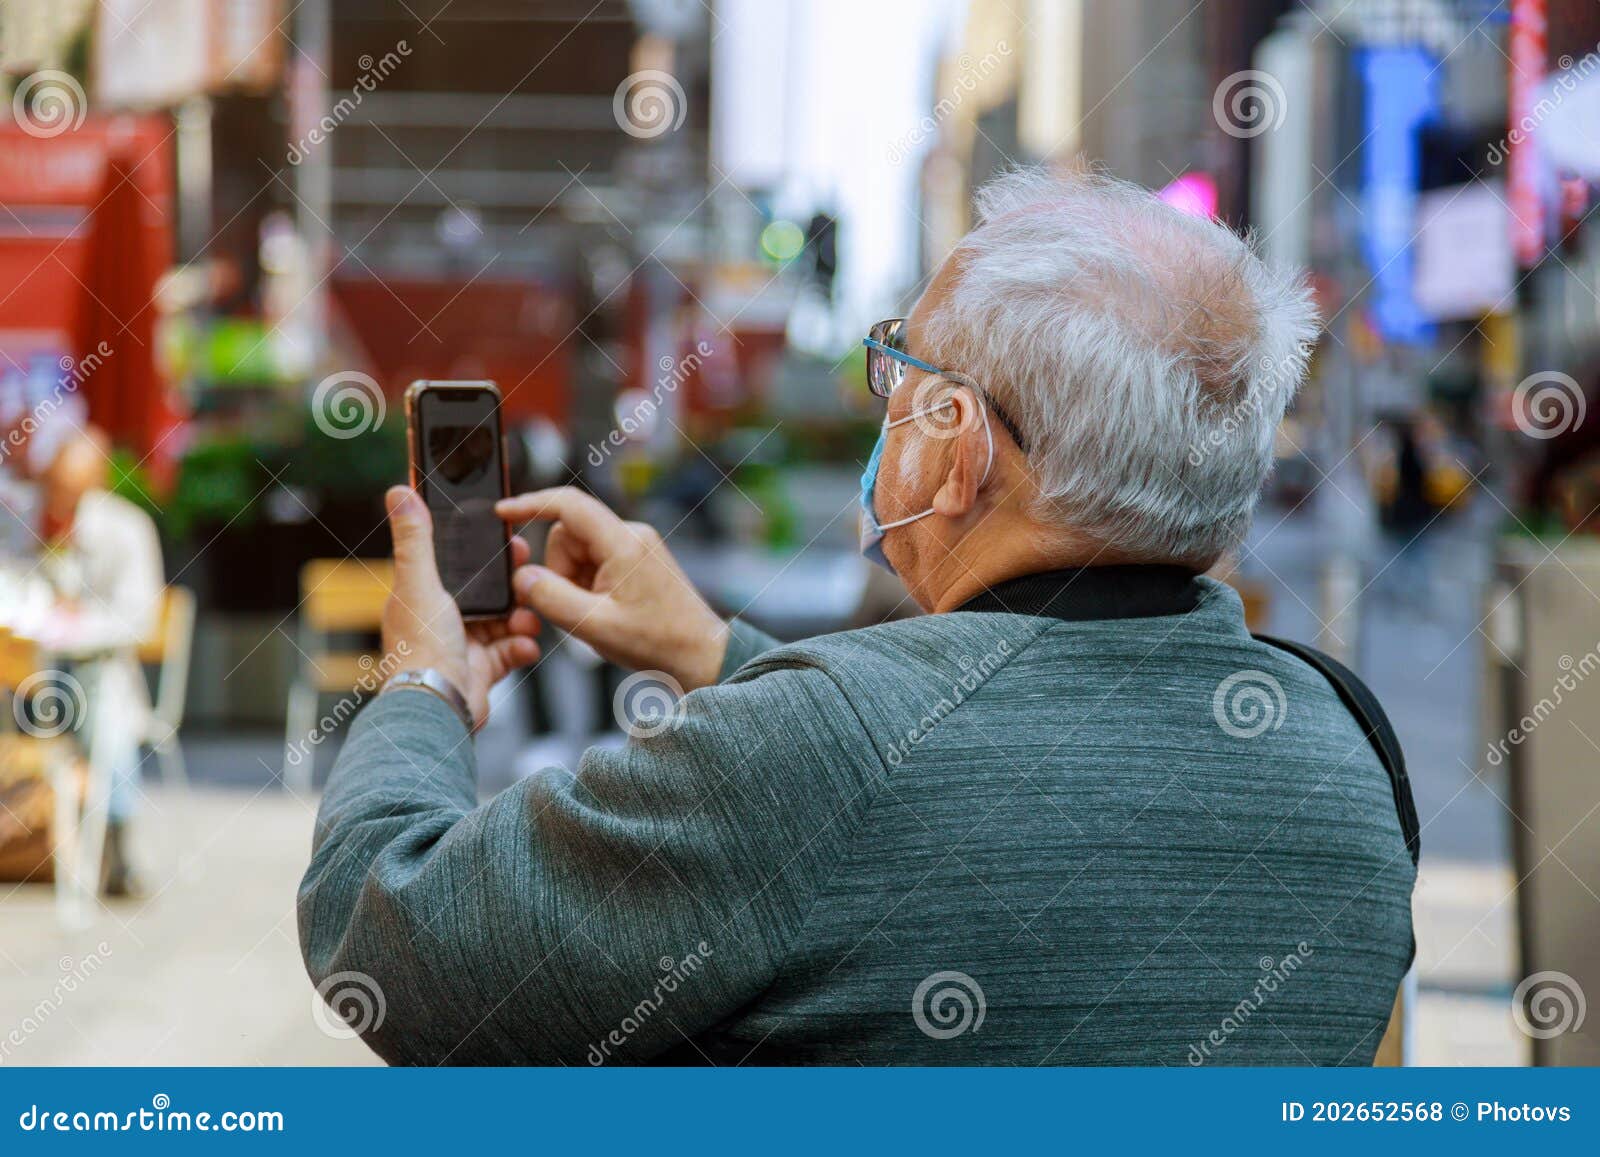 man traveling looking at in smartphone on times square, manhattan, new york city wearing a face mask in covid-19 pandemic season